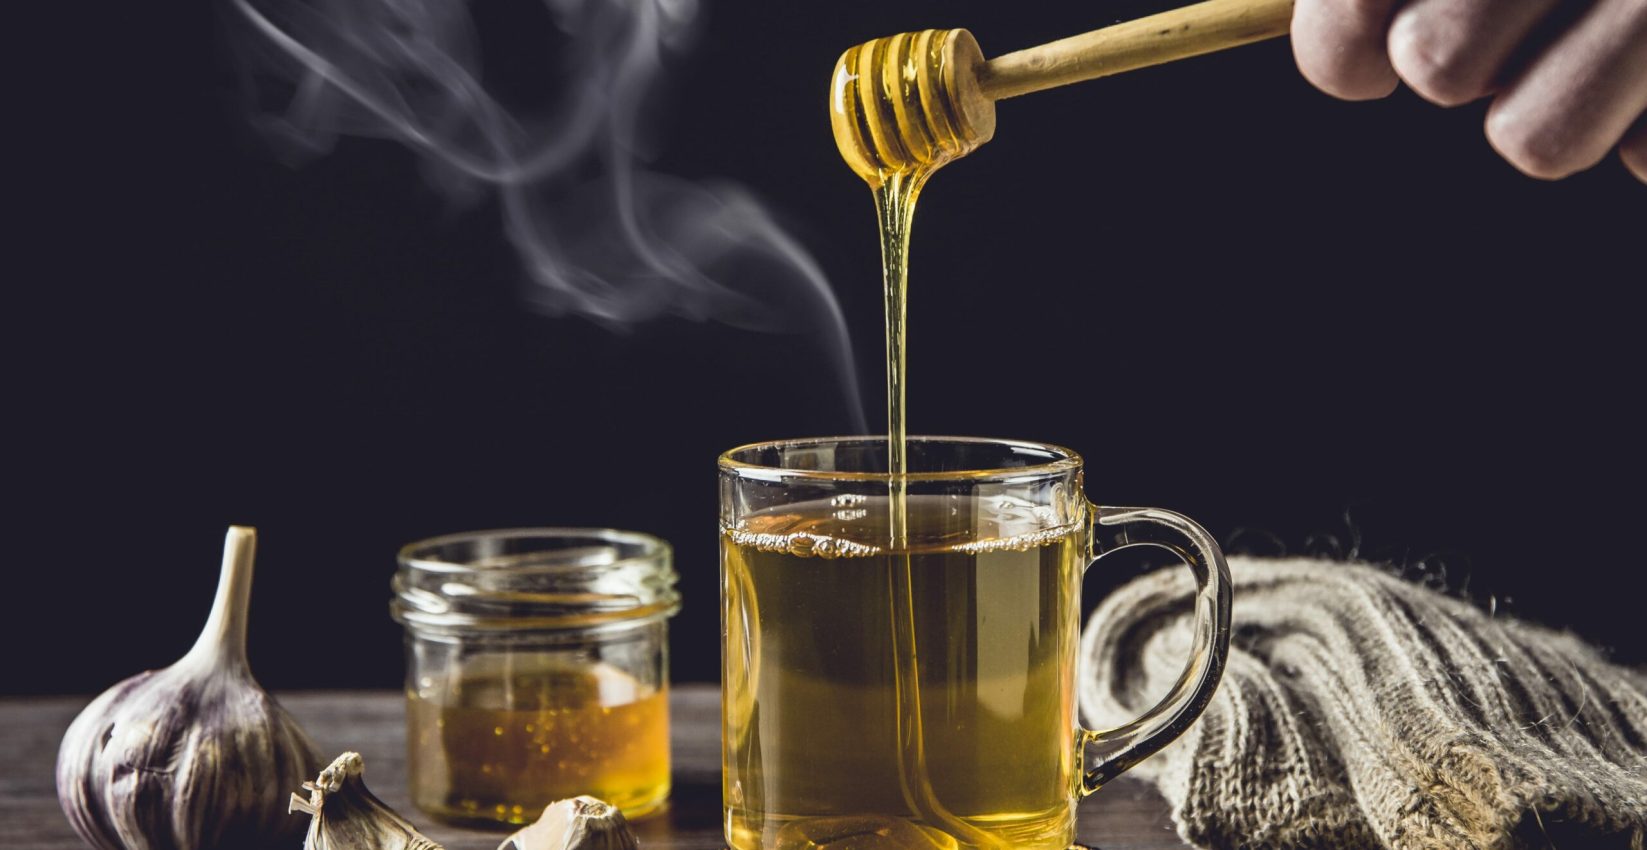 Man hand holding wooden honey dipper, honey spoon on top of glass of tea/ medicine and dripping honey in hot tea. Knitted socks, small jar of honey, garlic on wooden table against black background.